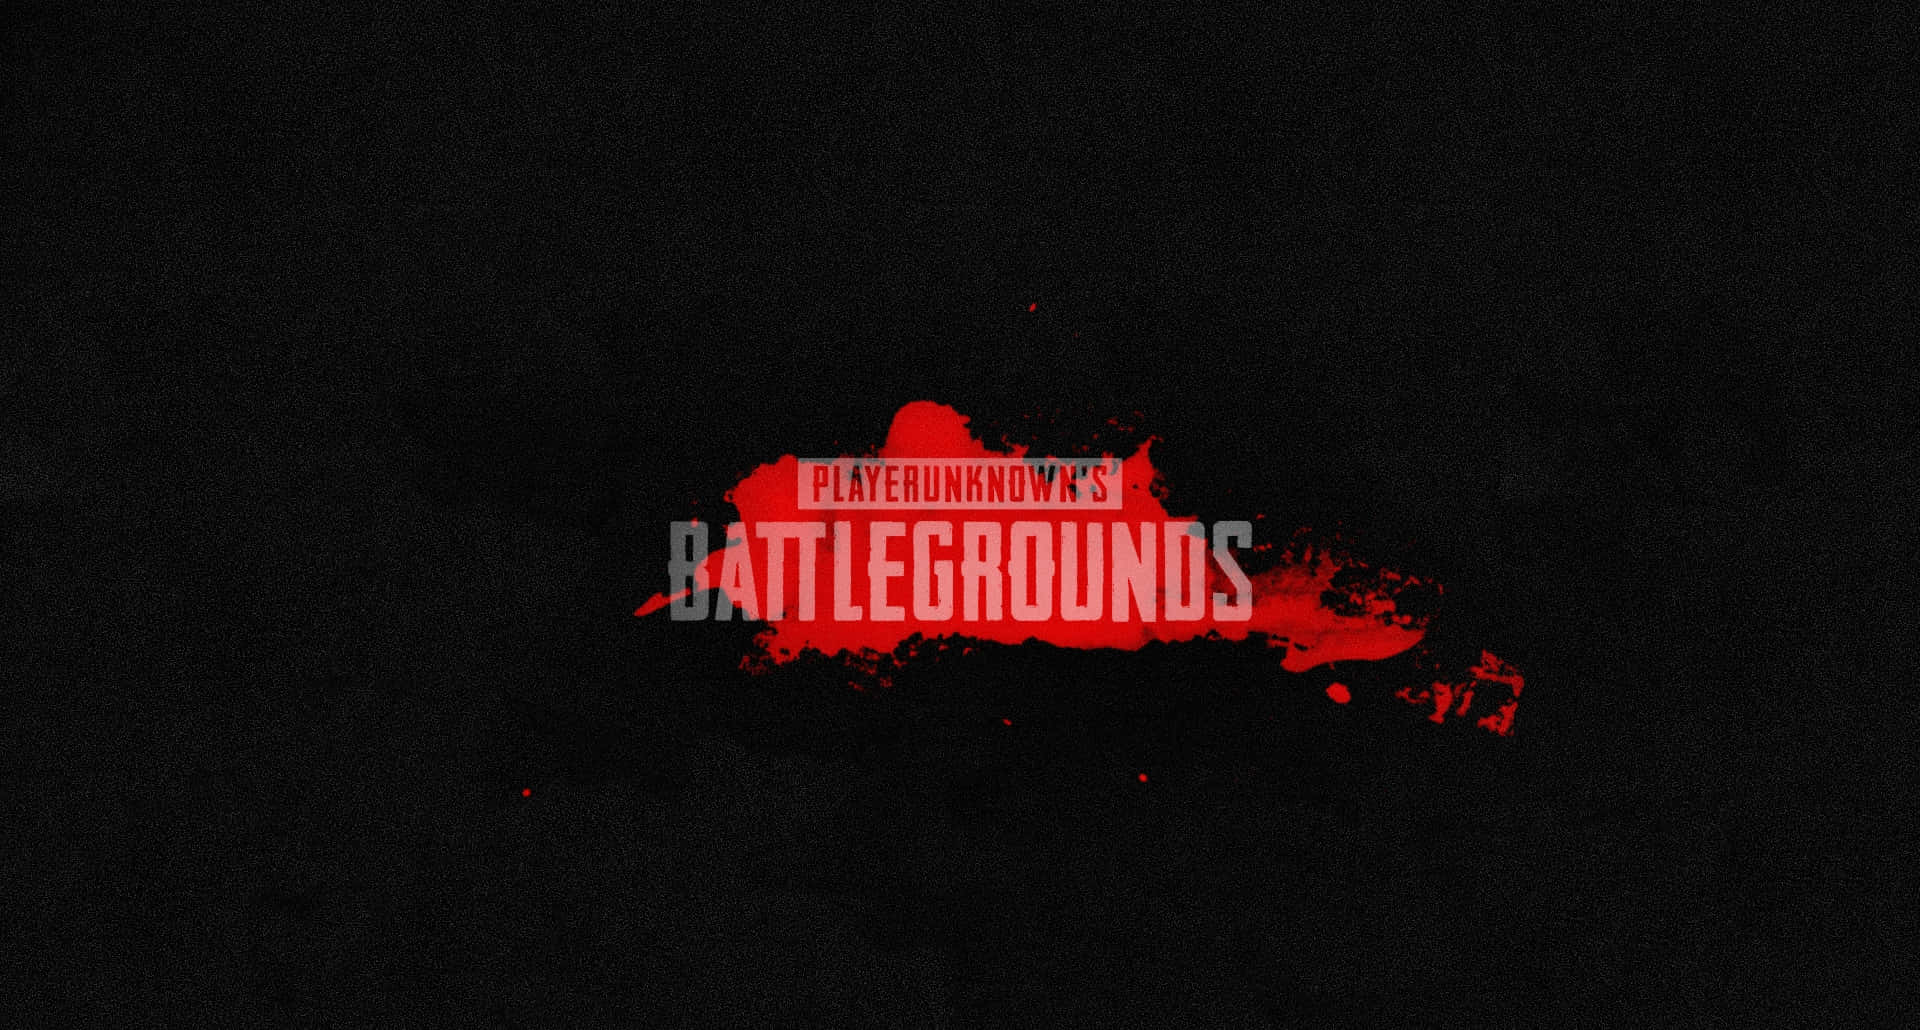 The official logo for the popular PUBG videogame